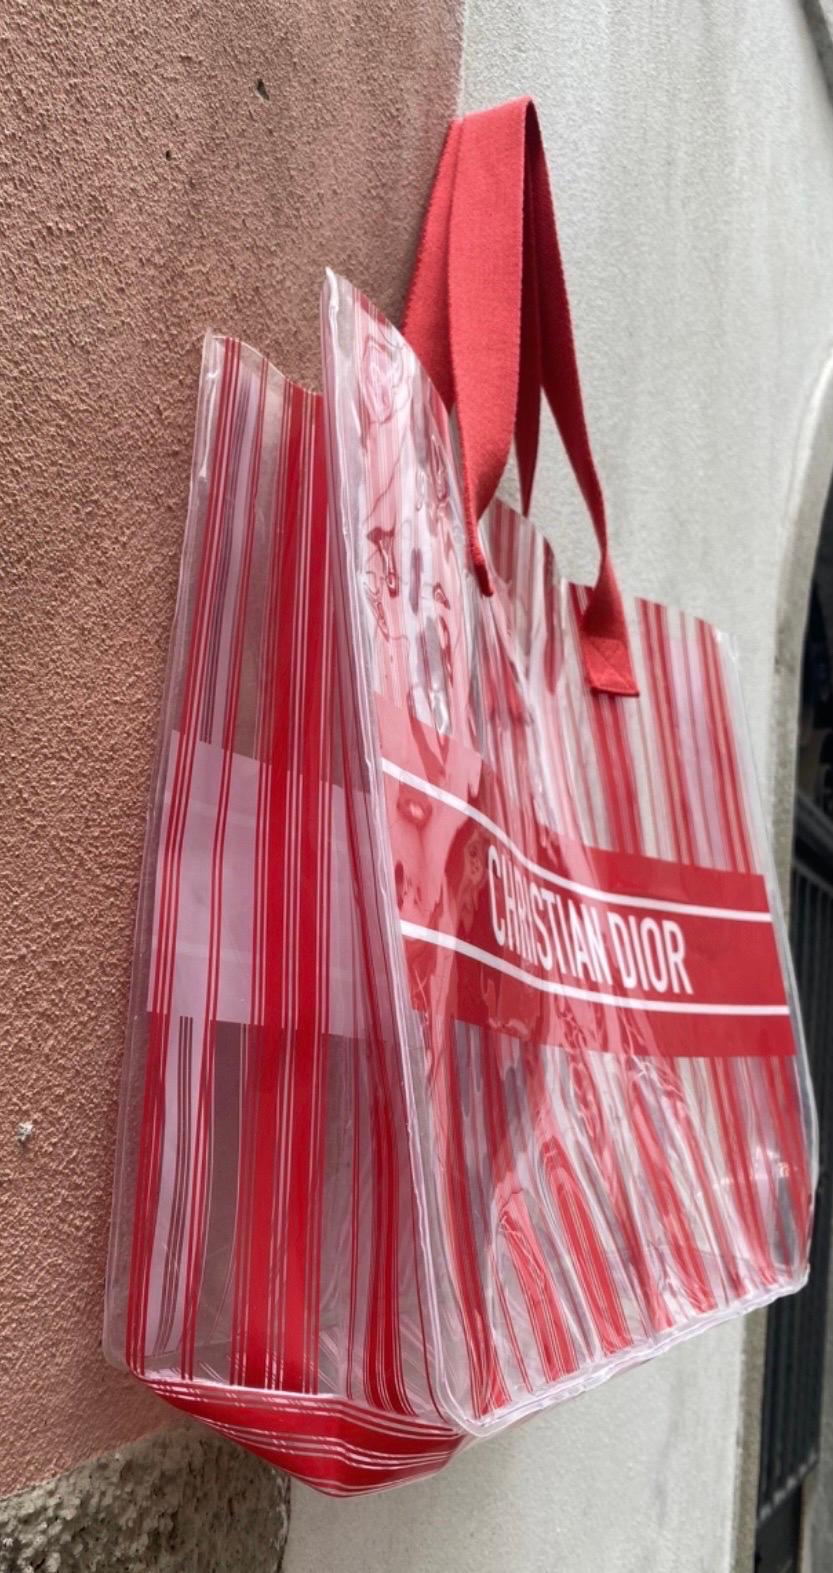 Transparent Christian Dior plastic shopping bag. Featuring red stripes and fabric’s handles. Measurements: base 41 cm, height 34 cm, depth 13 cm, handles height 20 cm, in good condition.